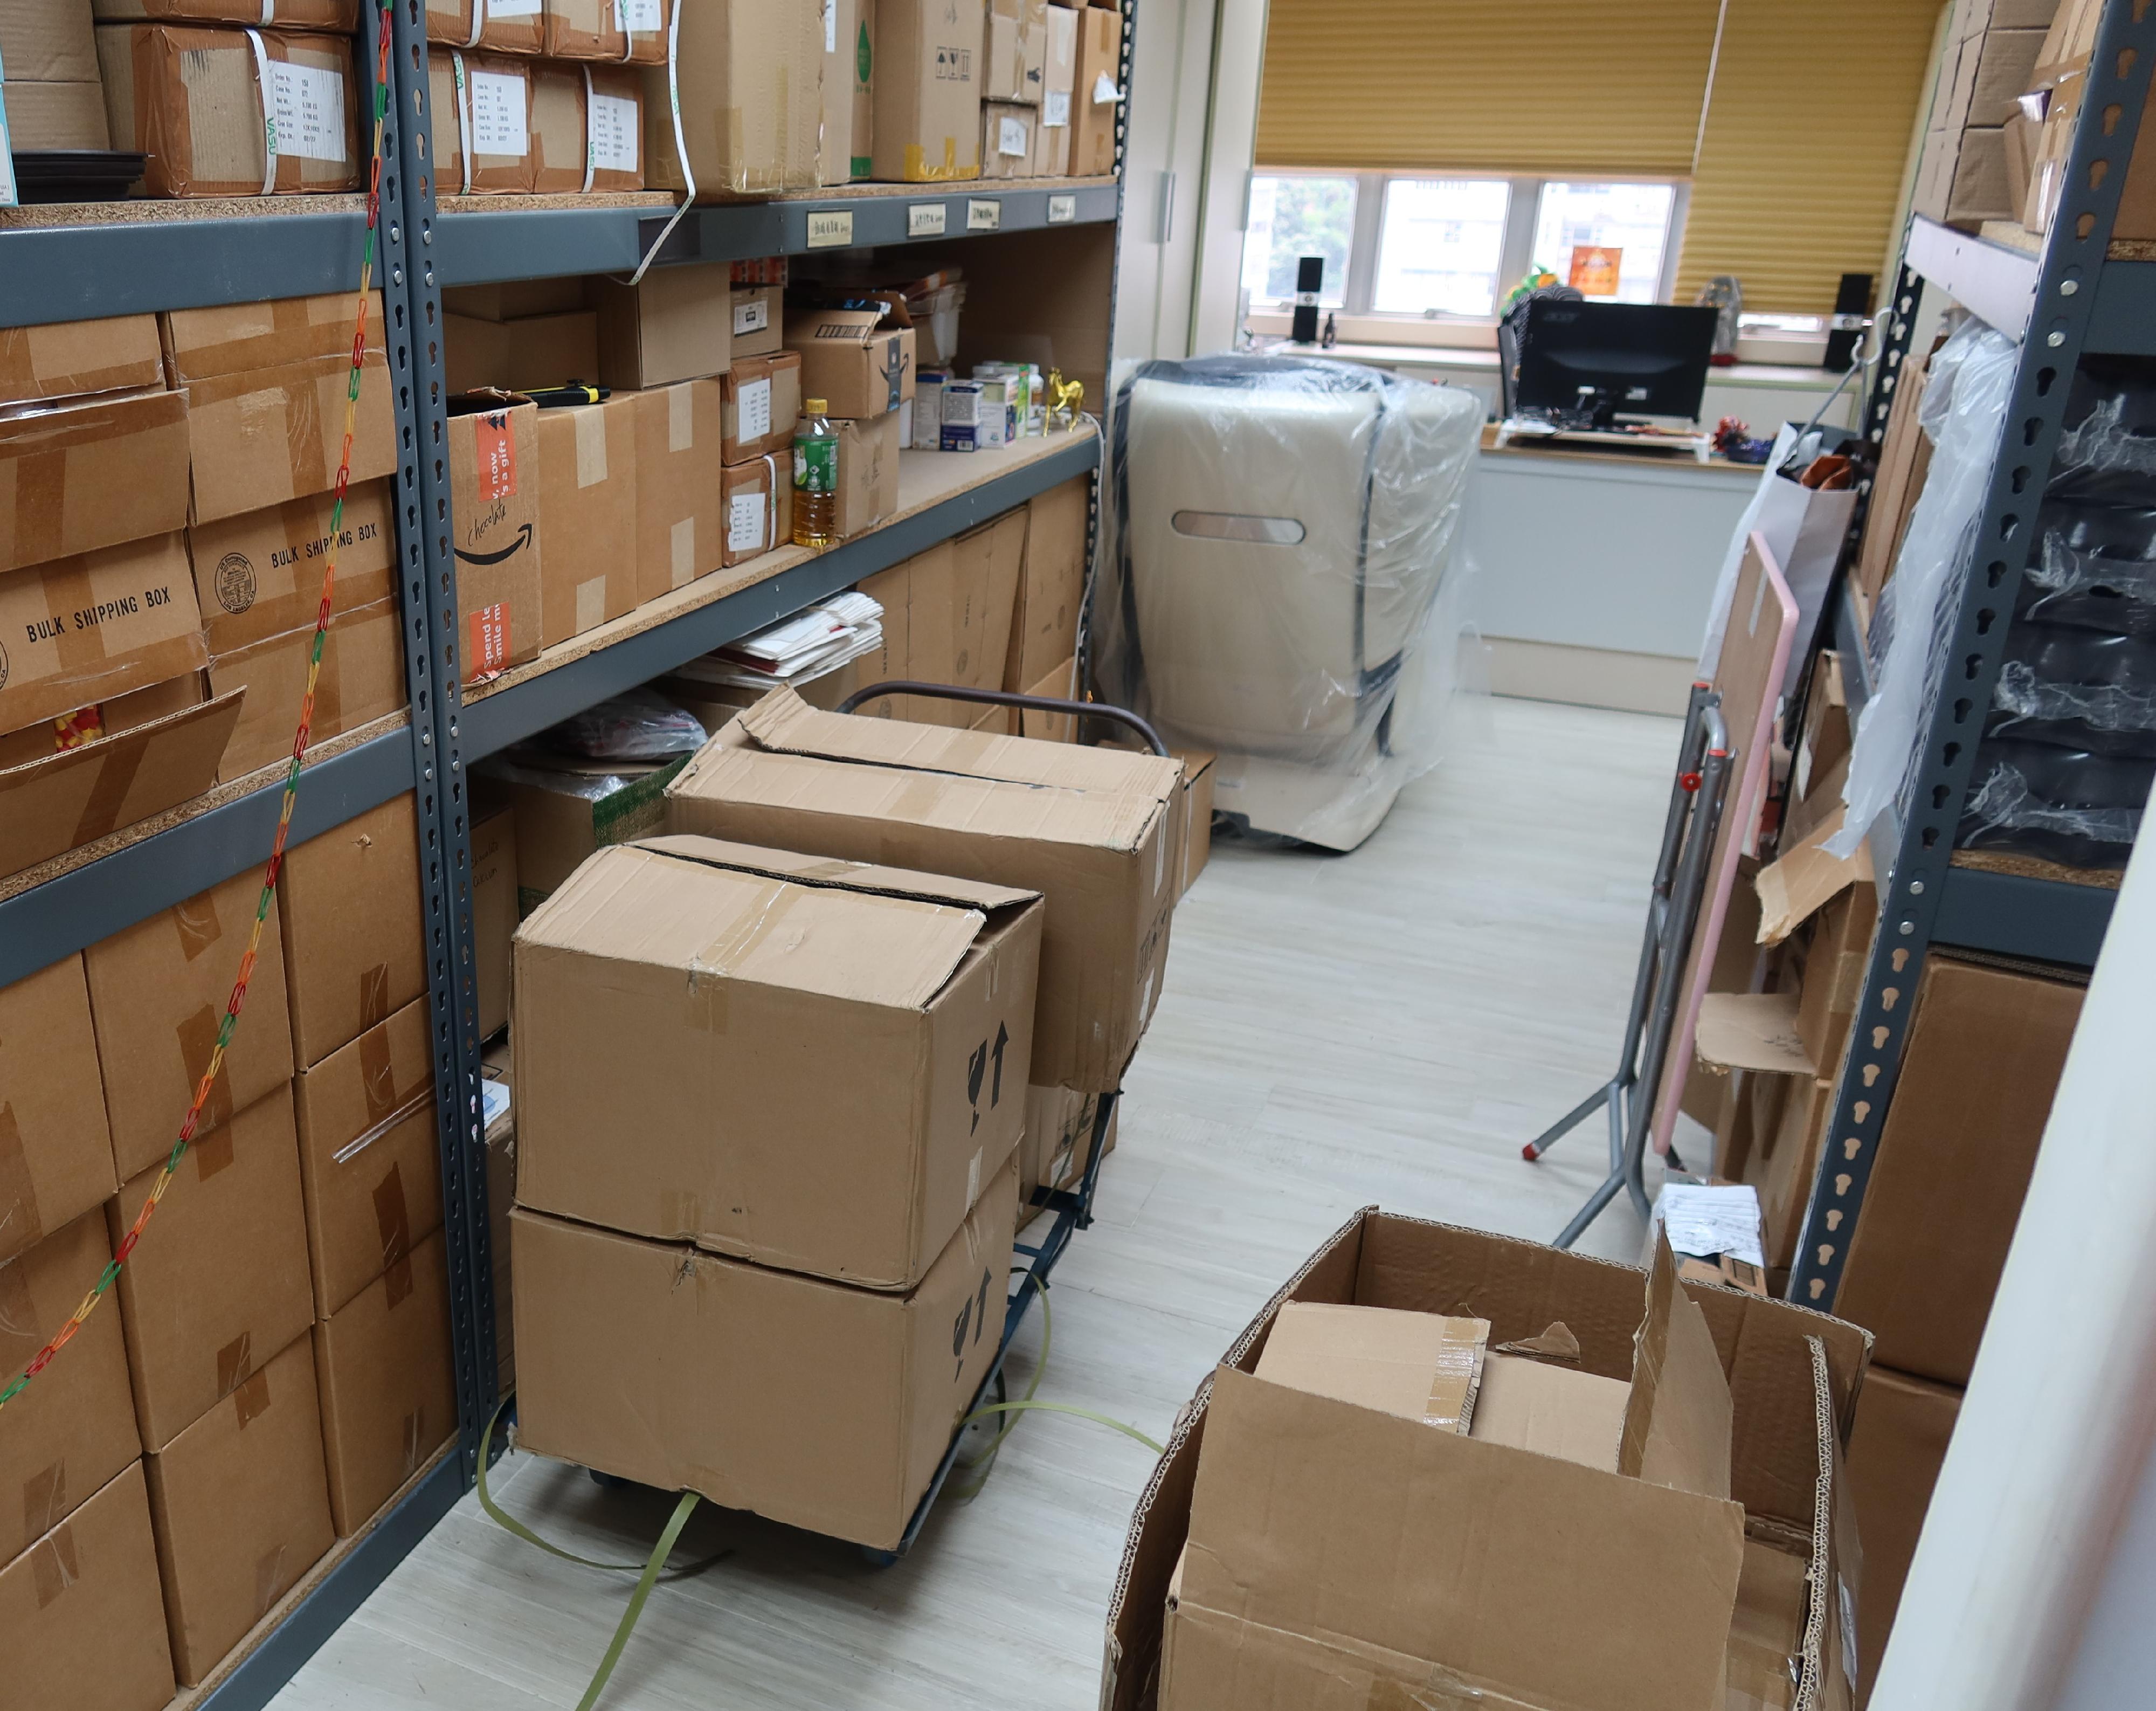 Hong Kong Customs conducted a special operation in Mong Kok and Fo Tan yesterday (June 4) to combat the sale of counterfeit goods and seized about 5 000 items of suspected counterfeit goods with an estimated market value of about $620,000. Photo shows a storage facility that stores suspected counterfeit goods raided by Customs officers.